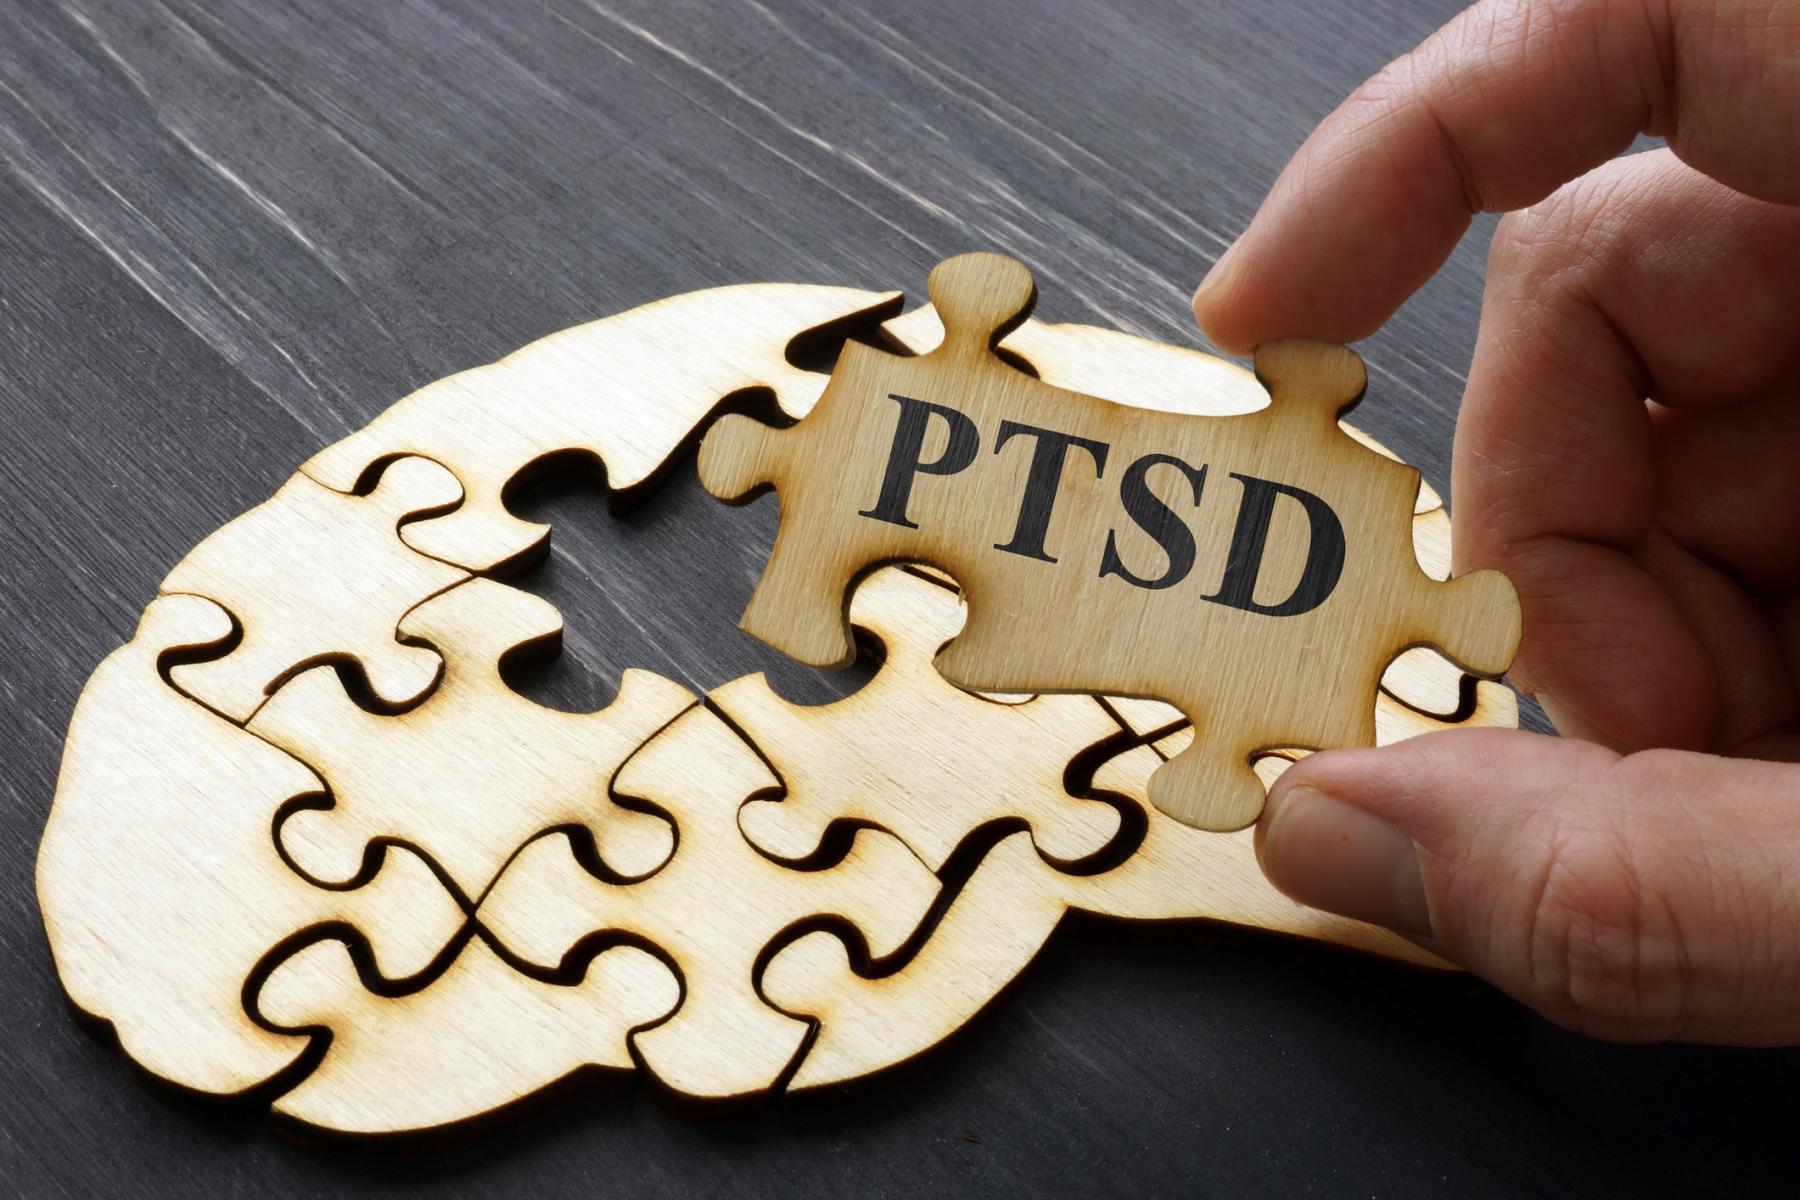 Pharmacologic and Nonpharmacologic Treatments for Posttraumatic Stress Disorder: An Update of the PTSD Repository Evidence Base